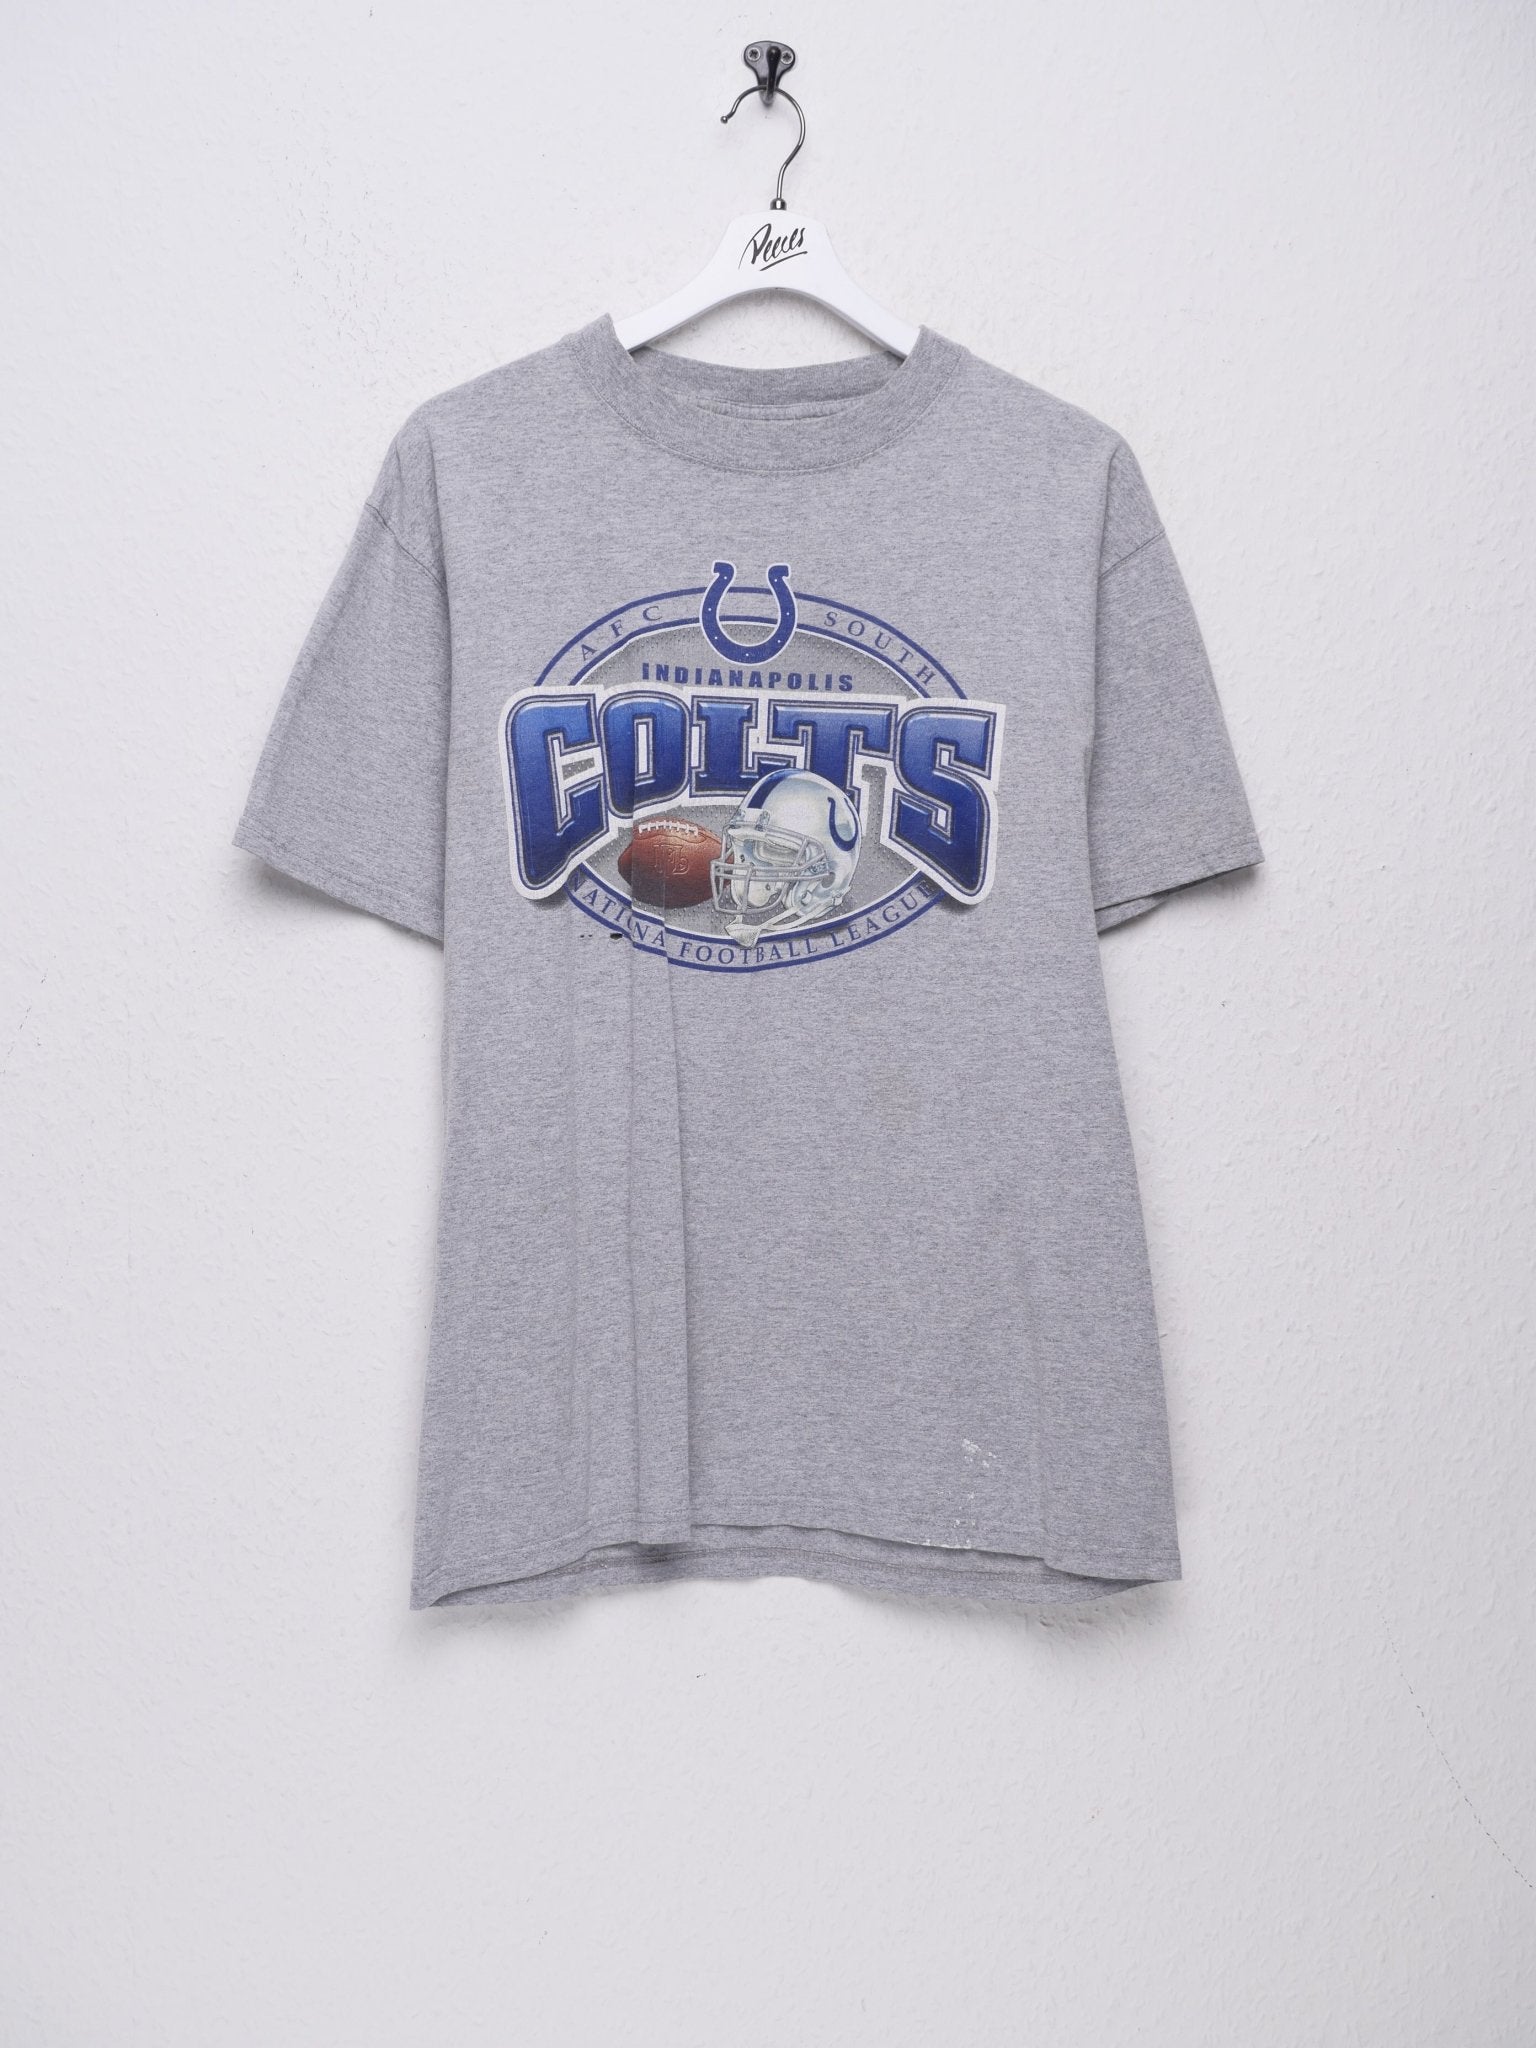 NFL Indianapolis Colts printed graphic grey Shirt - Peeces